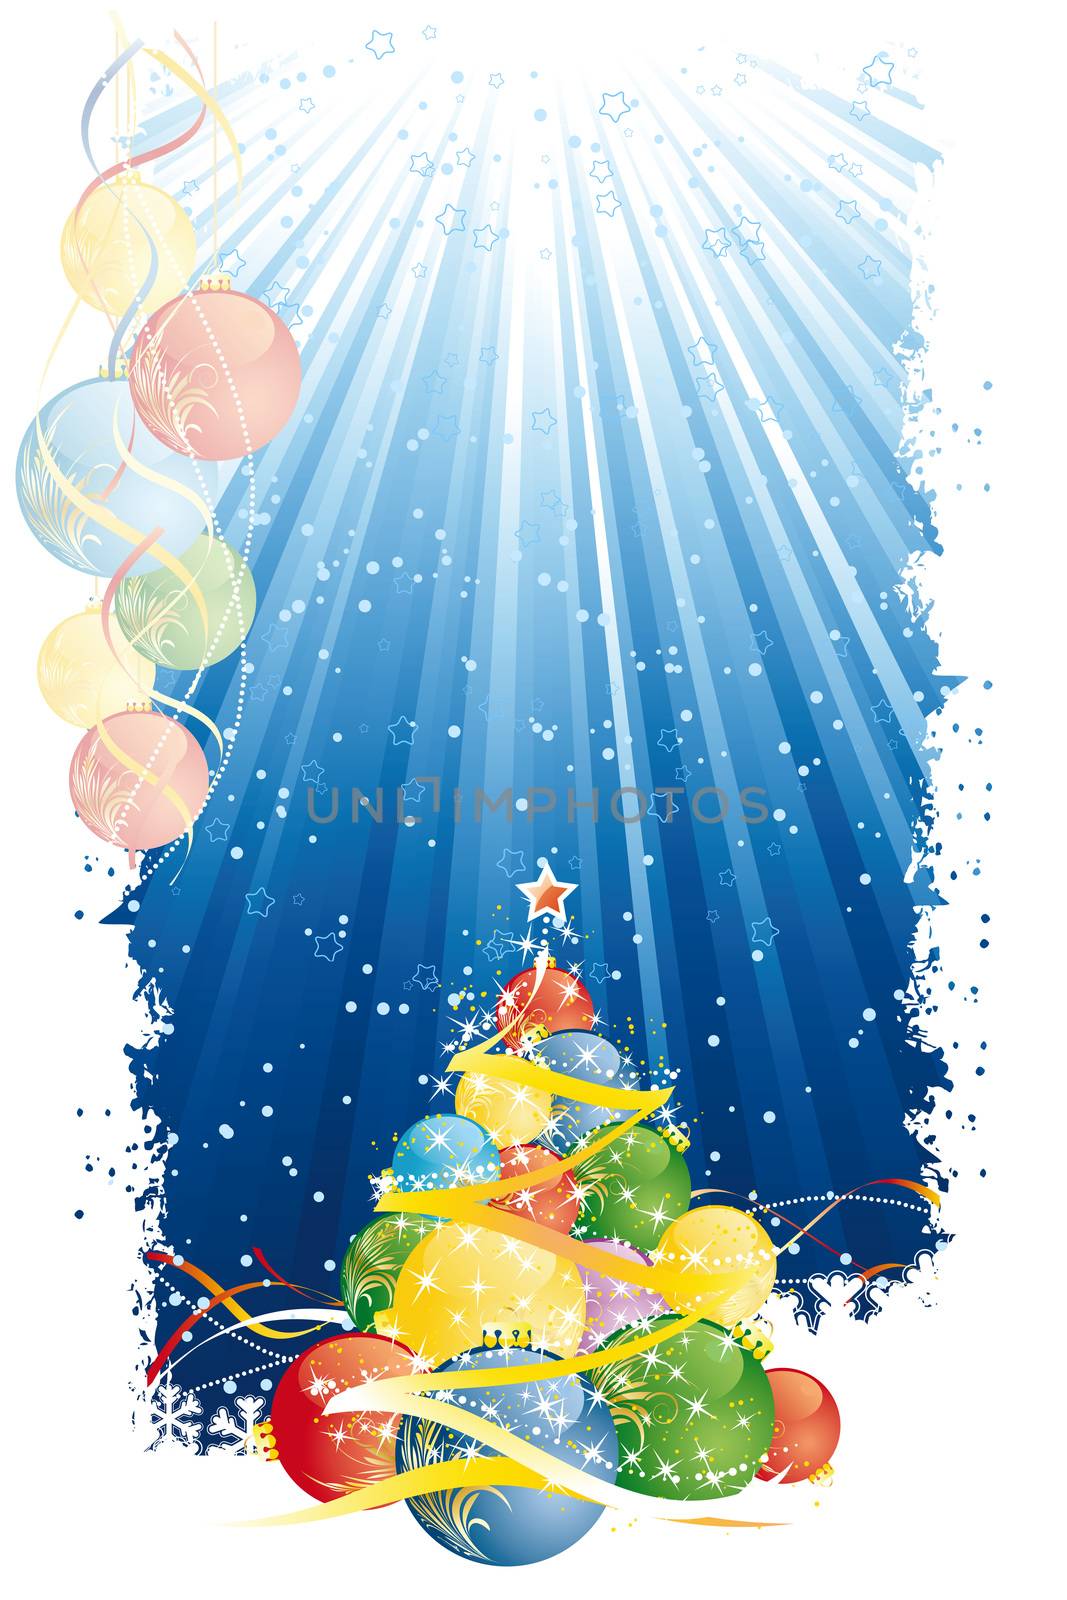 Magic Christmas tree and vertical blue stripes by WaD